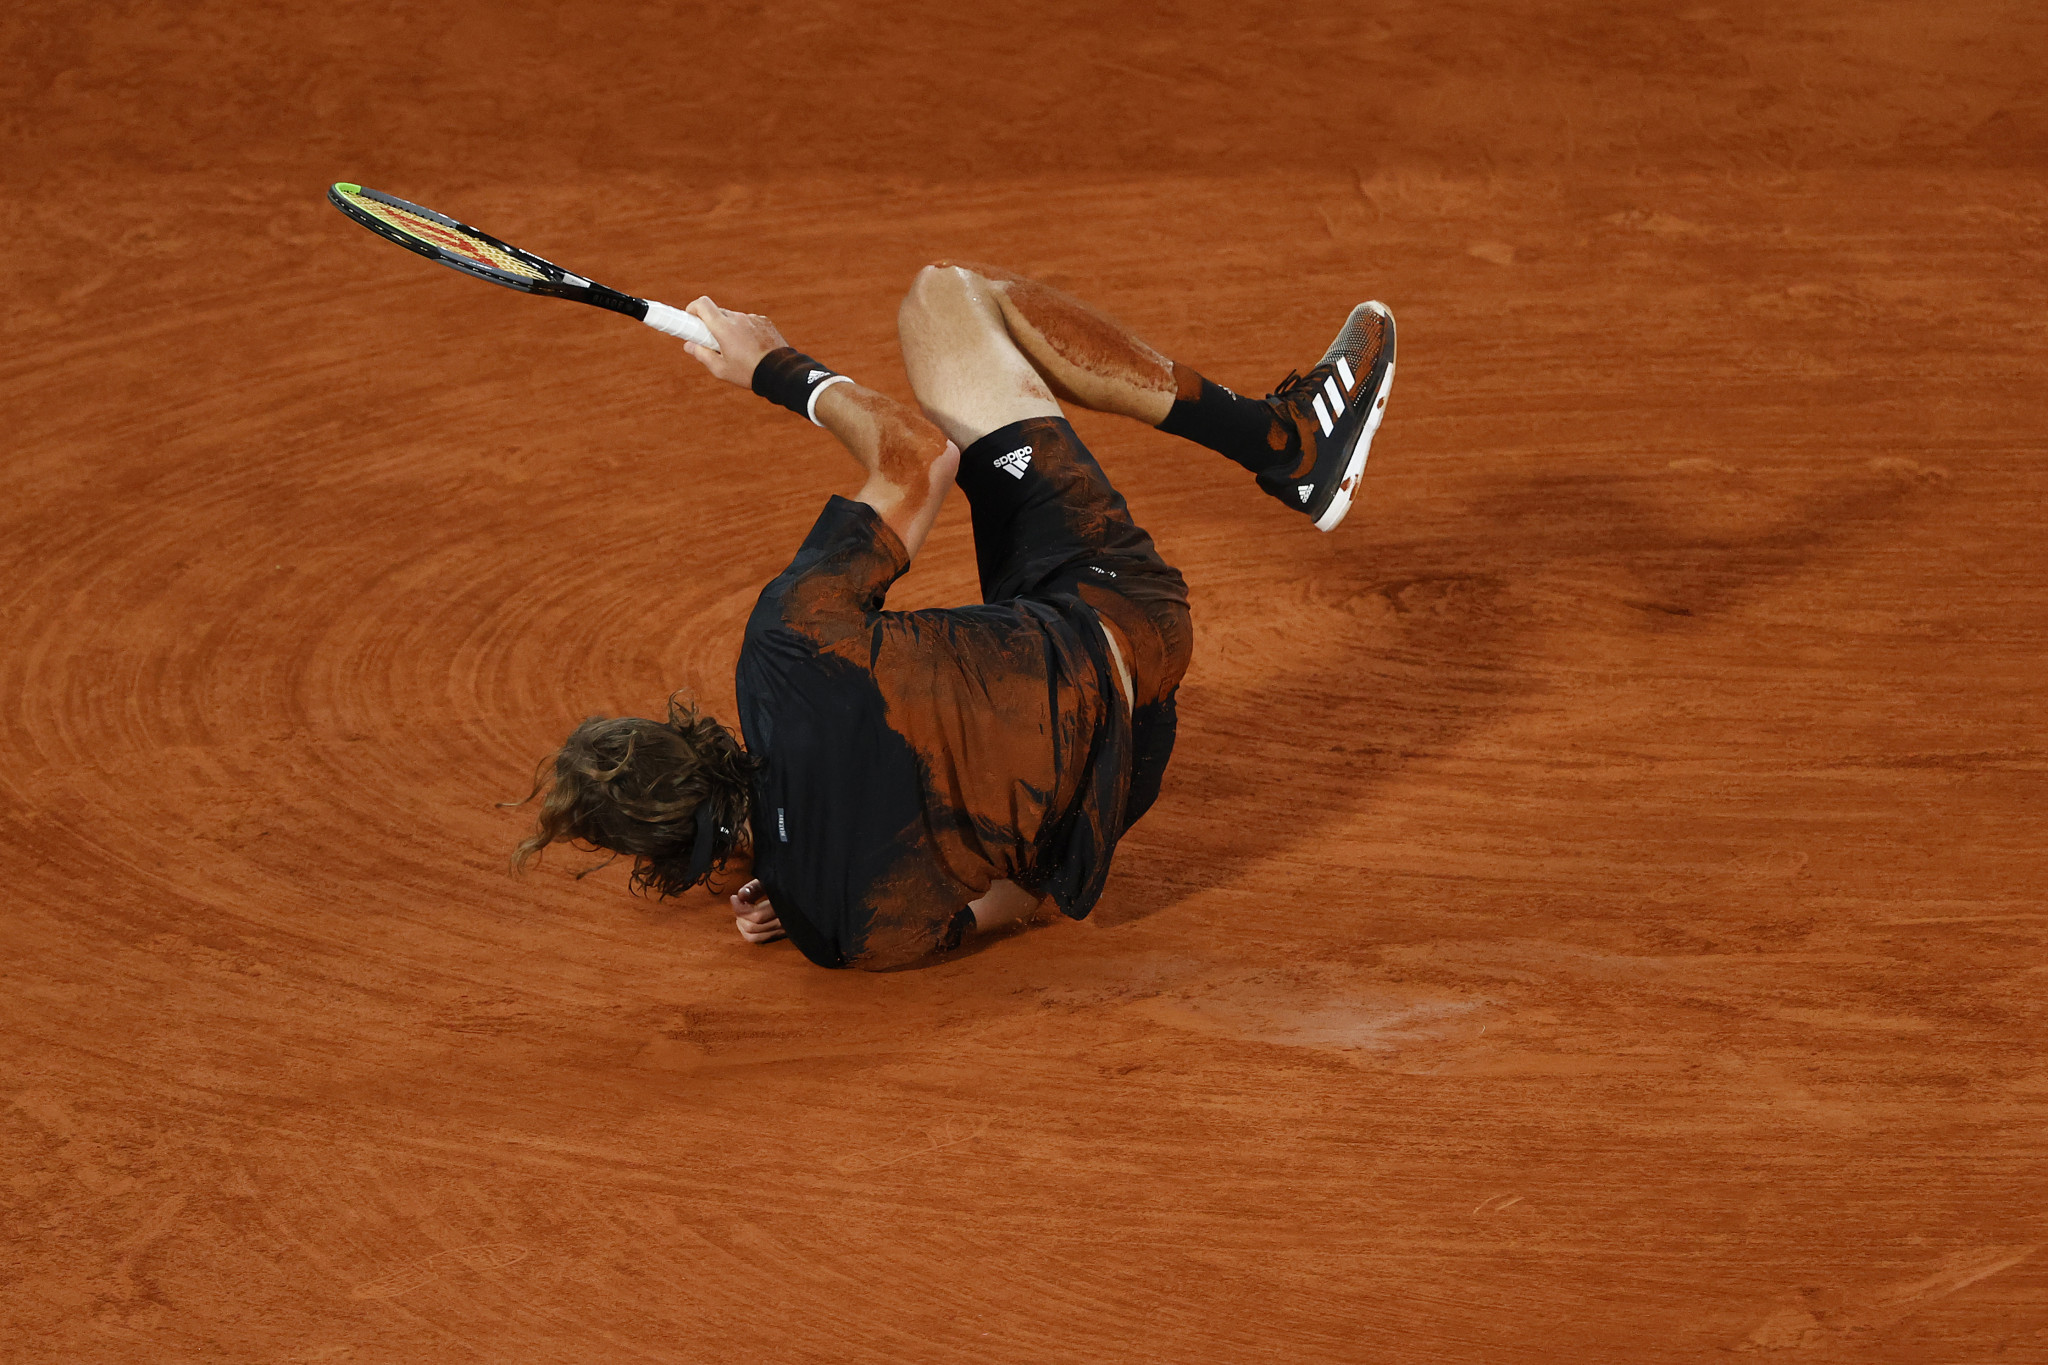 Fifth seed Stefanos Tsitsipas takes a tumble on his way to defeating Grigor Dimitrov ©Getty Images